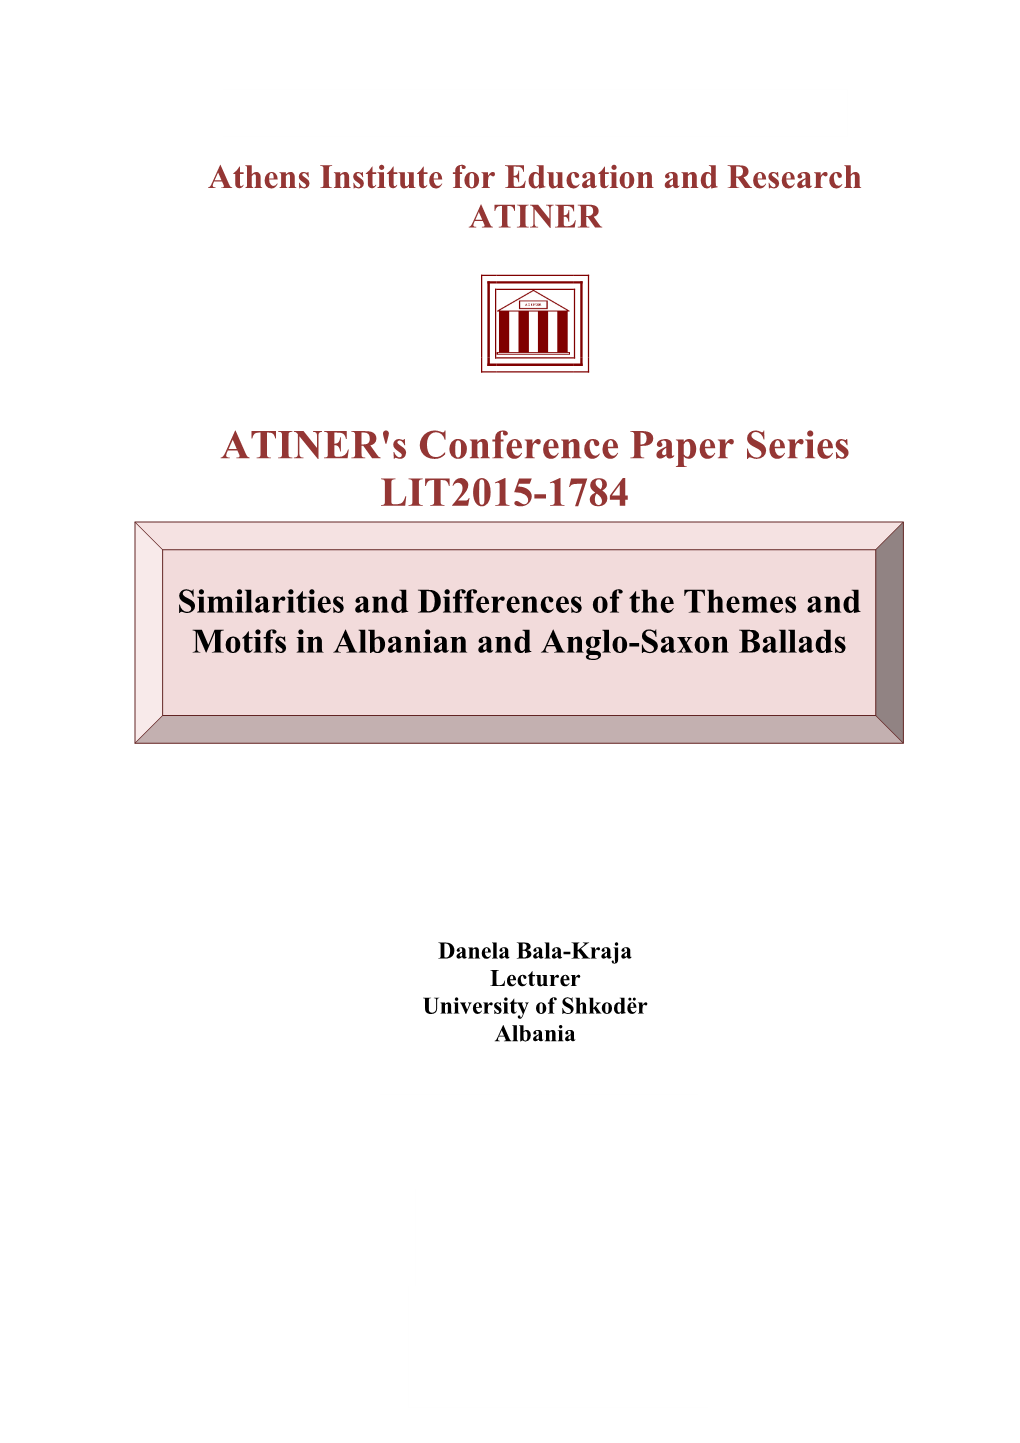 ATINER's Conference Paper Series LIT2015-1784